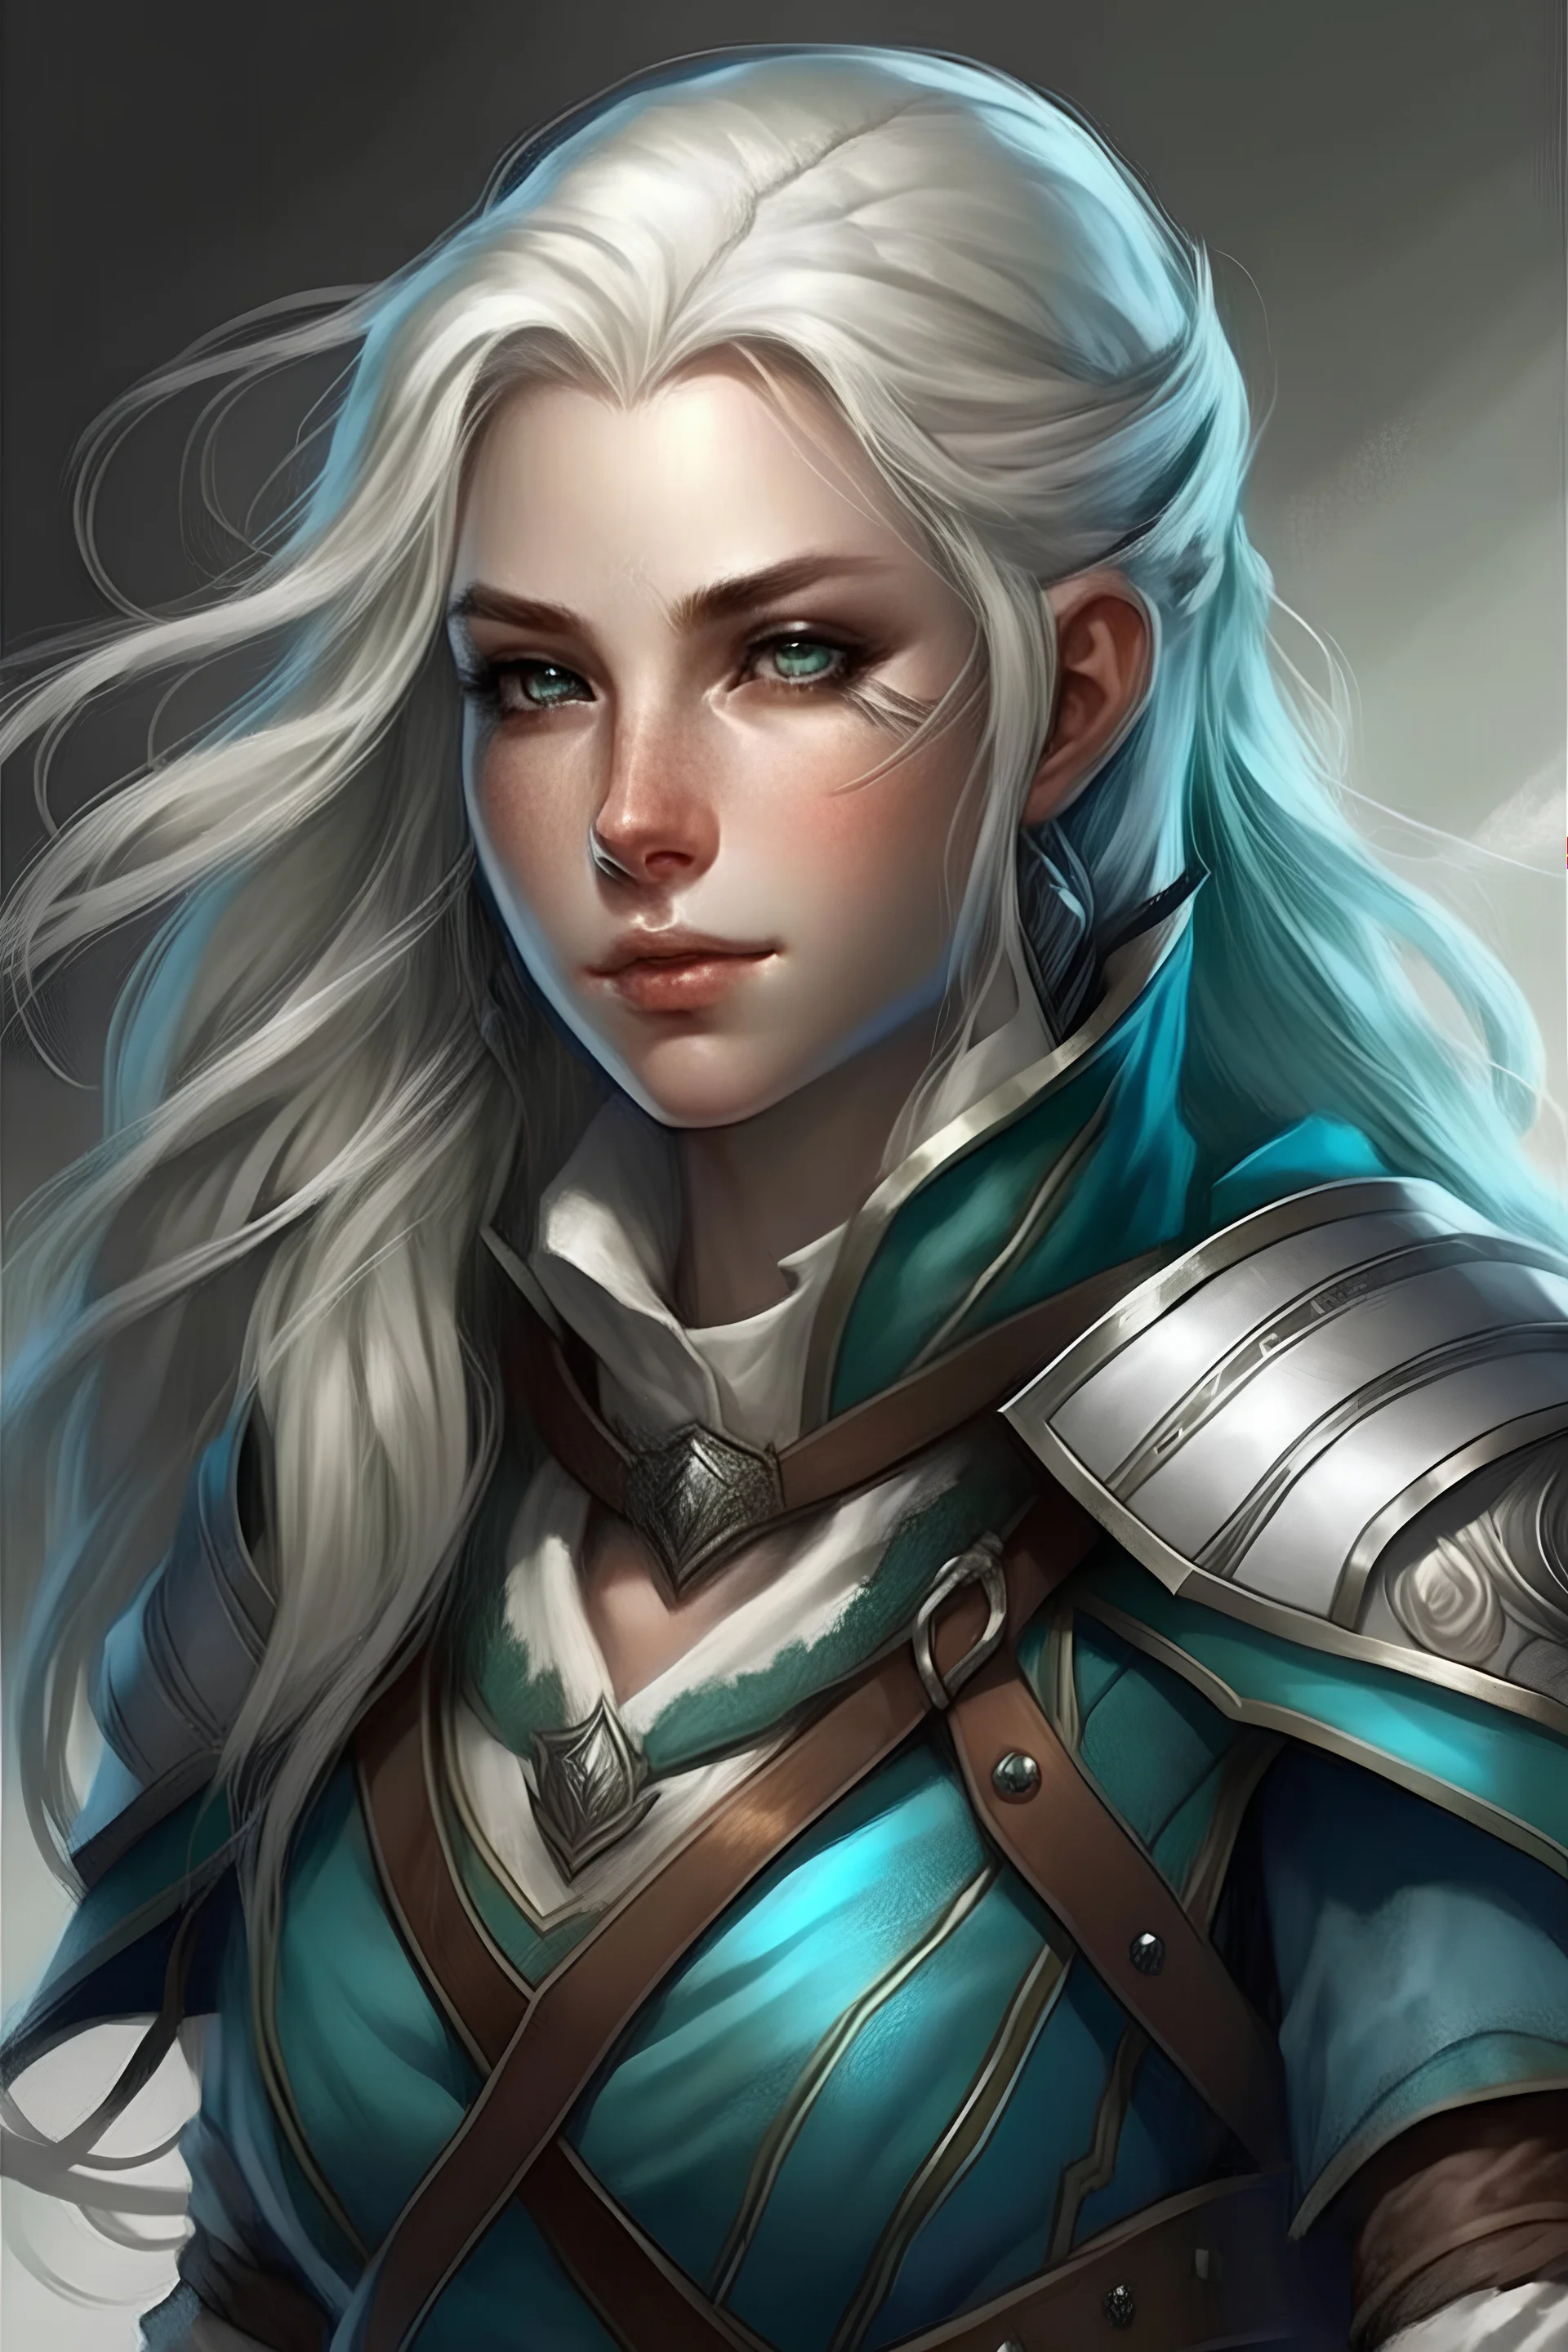 Gale is an air genasi from DND. She has white hair and blue-tinted skin. her eyes are green and brown like the dirt from the earth. Her hair is long and wavy but is often tied up in a high pony. She has armor that shows symbols of protection and justice. She has a sharp face, but kind eyes